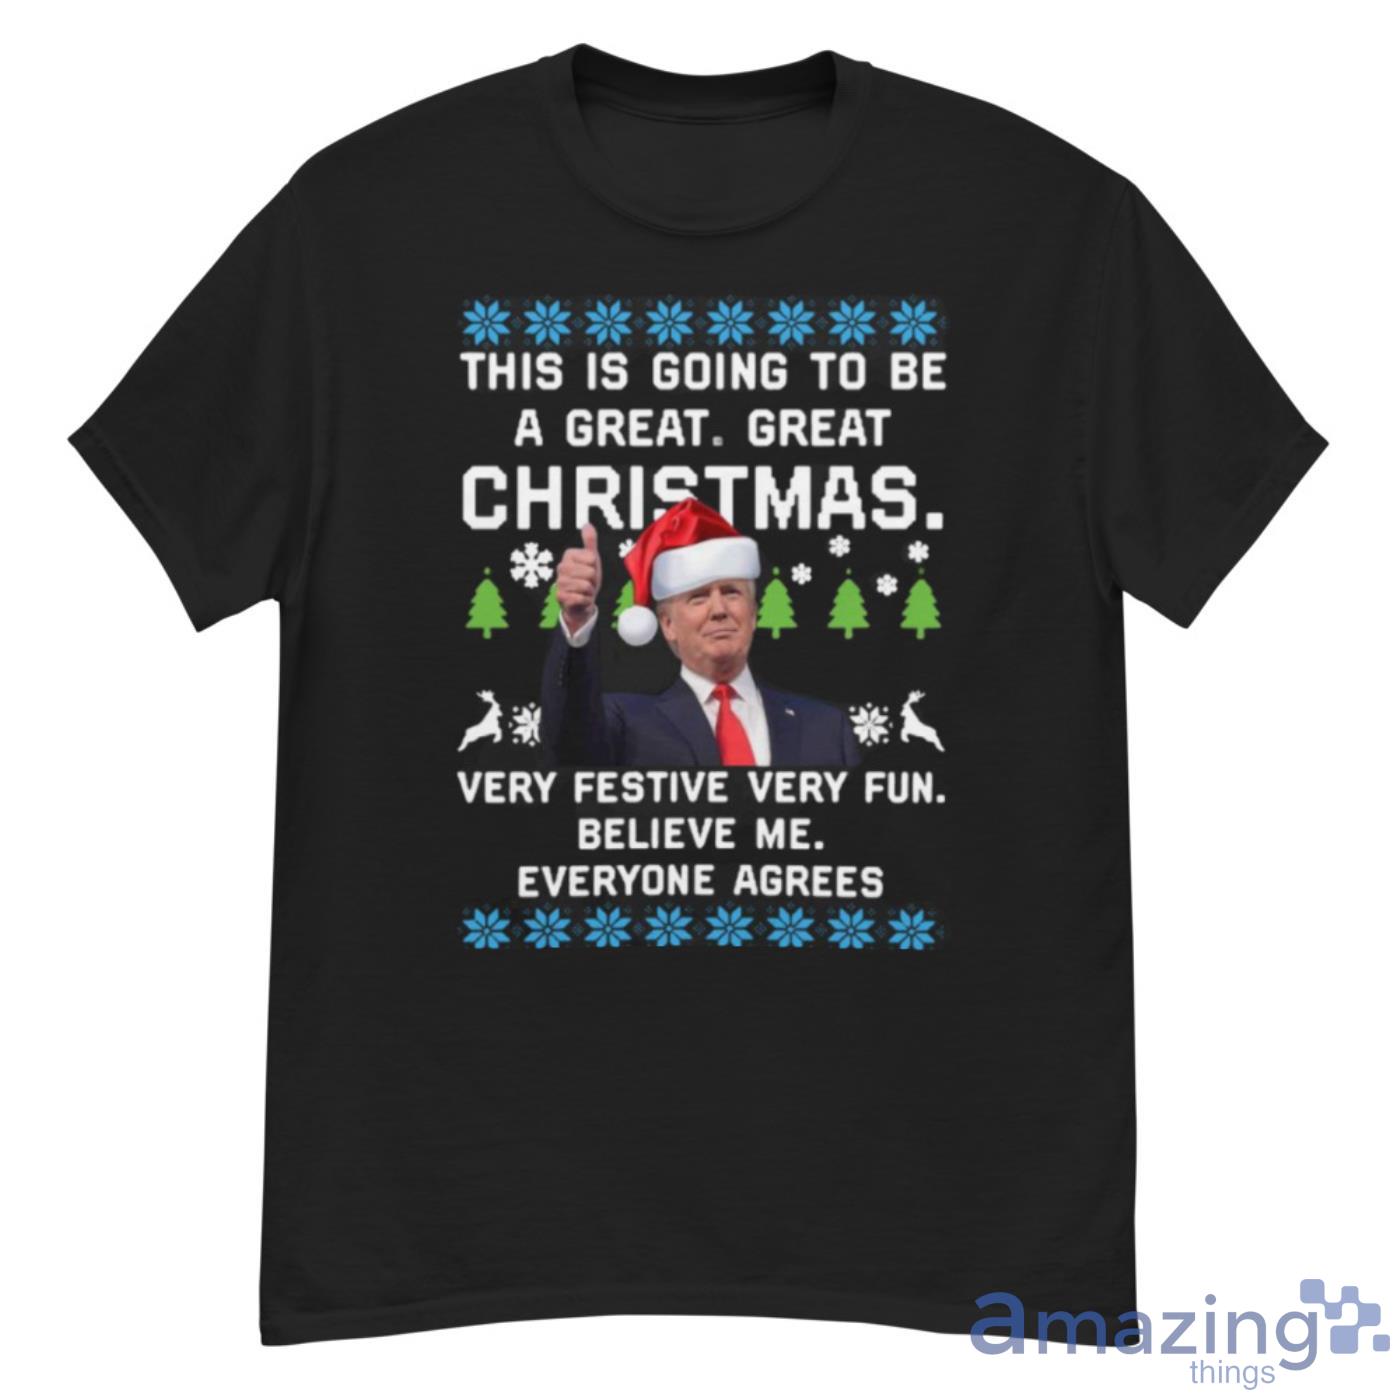 Donald Trump This Is Going To Be A Great Christmas Very Festive Very Fun Believe Me Ugly Shirt - G500 Men’s Classic T-Shirt